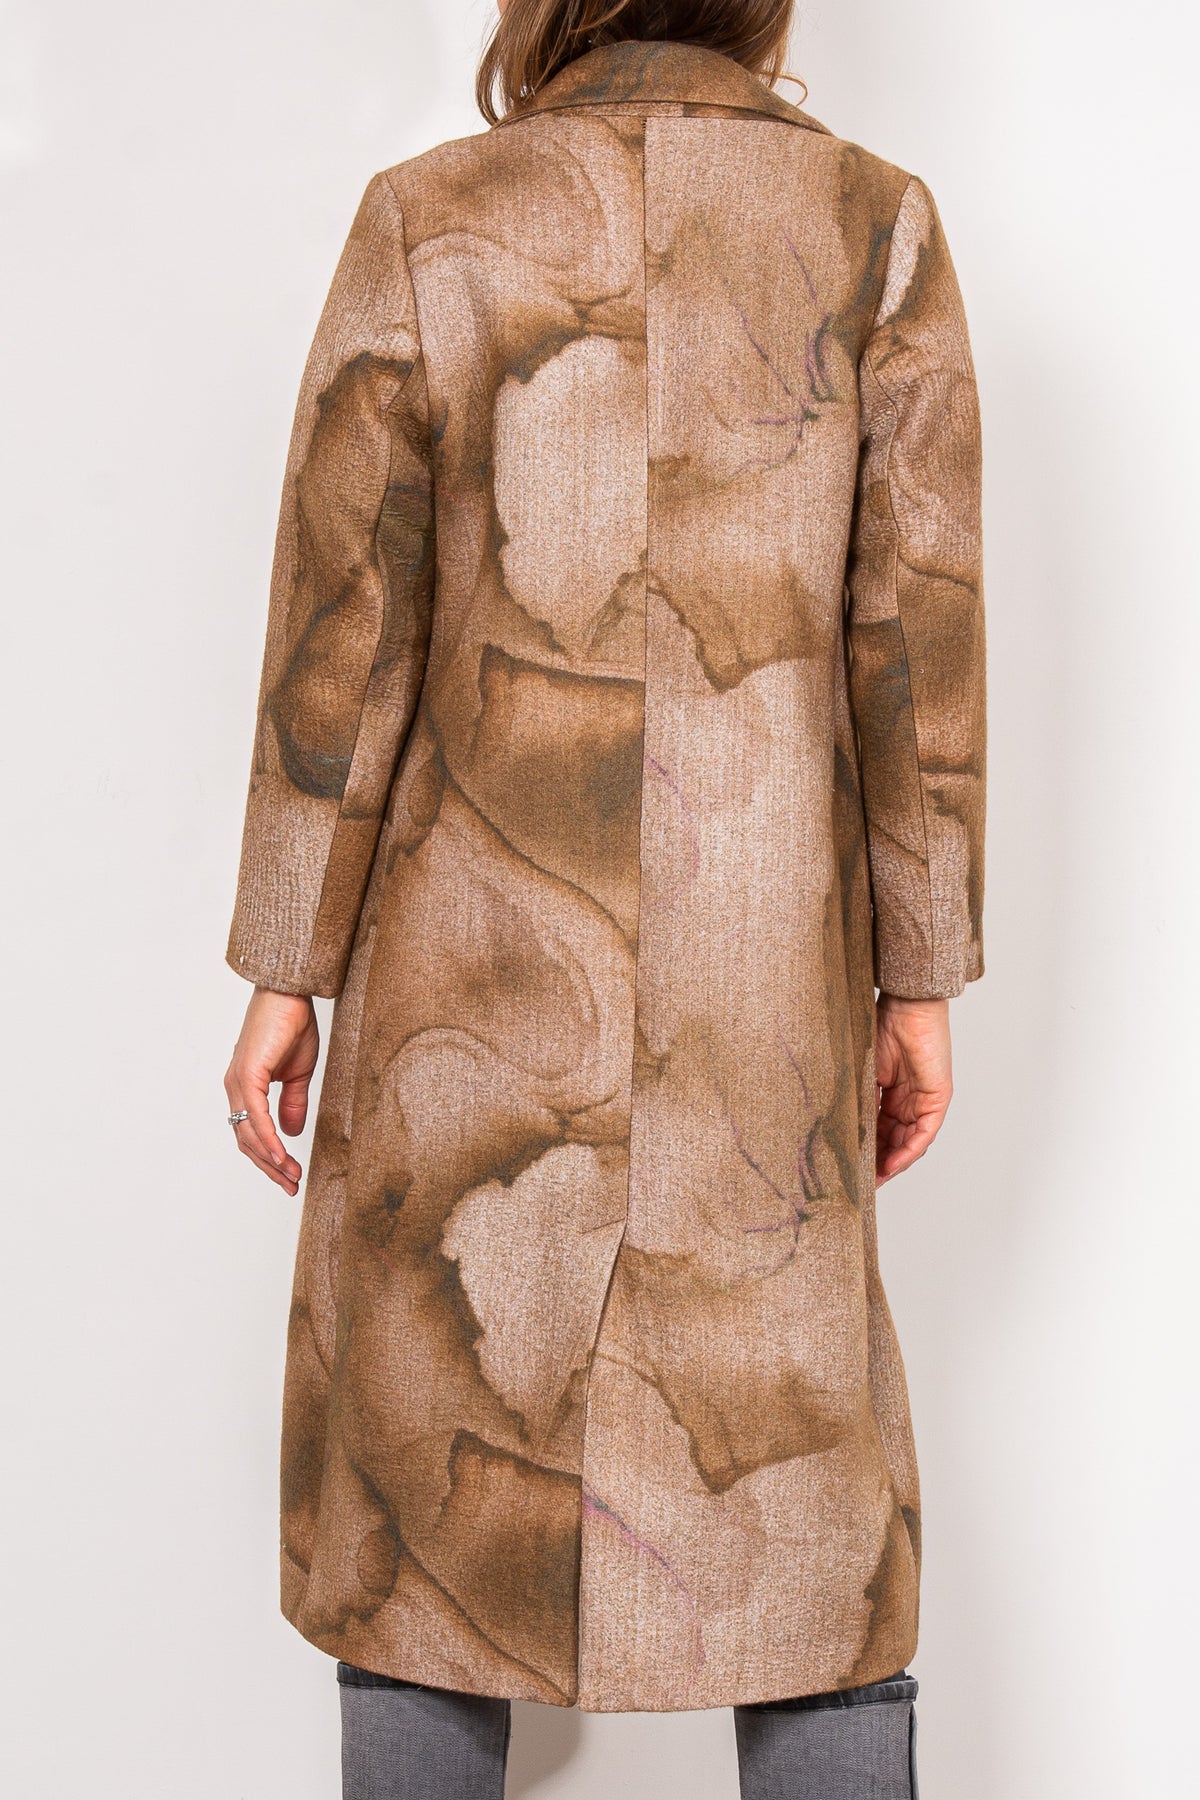 CURATE by Trelise Cooper Long Night Coat